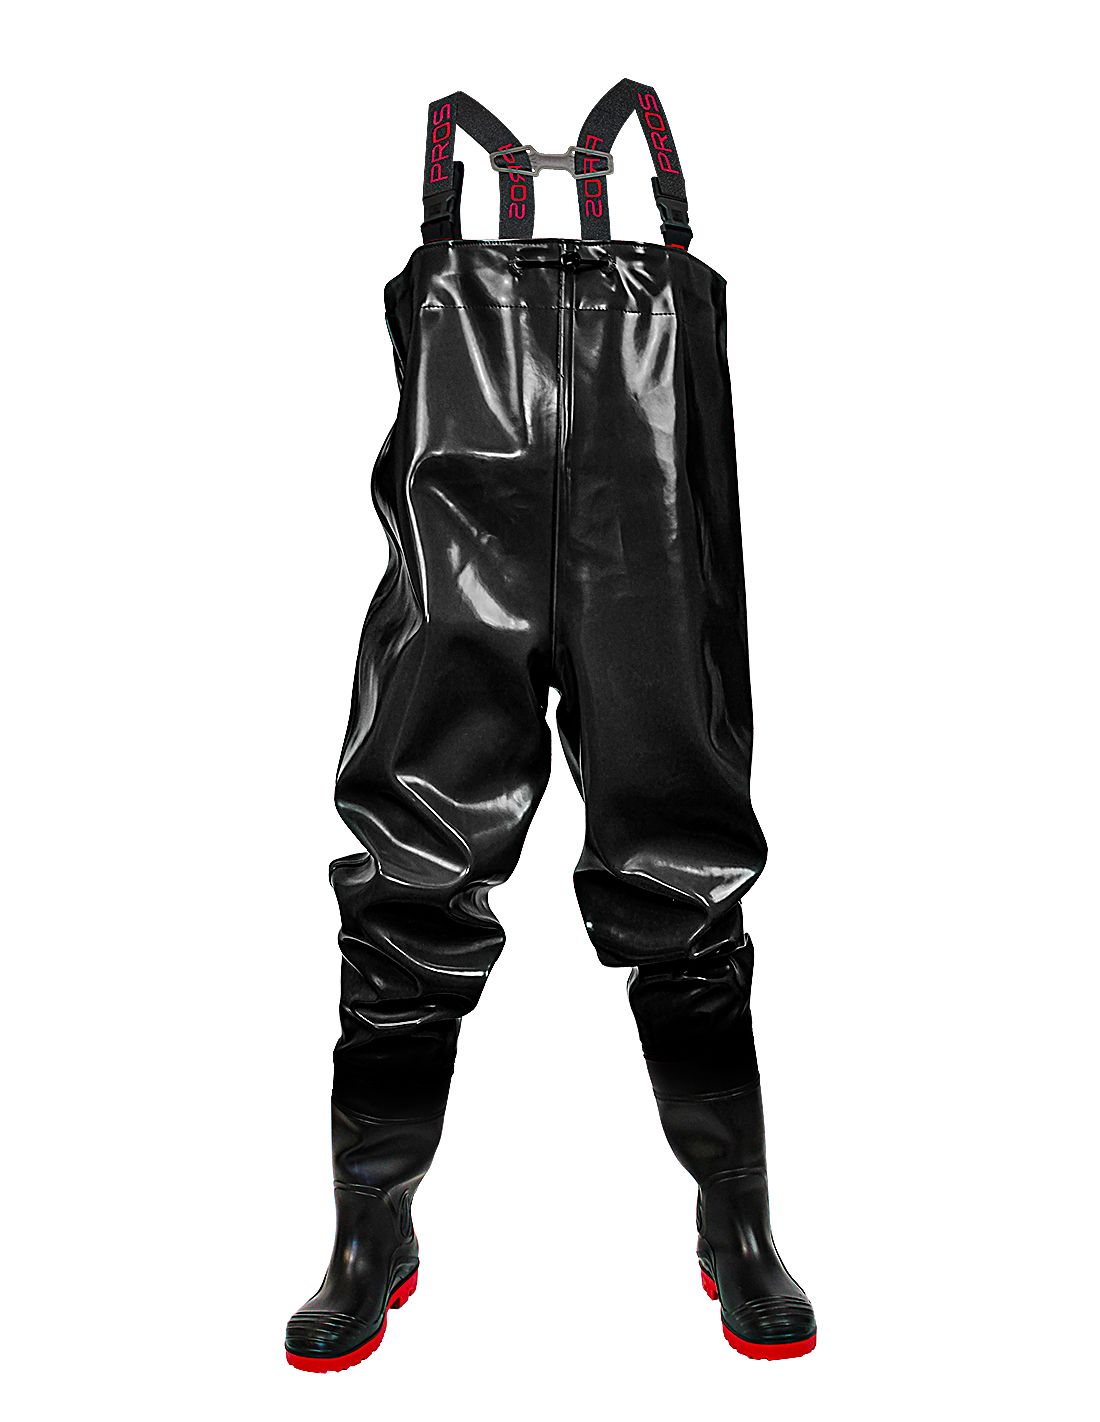 Chest waders model SB01 STRONG BLACK with high resistance to